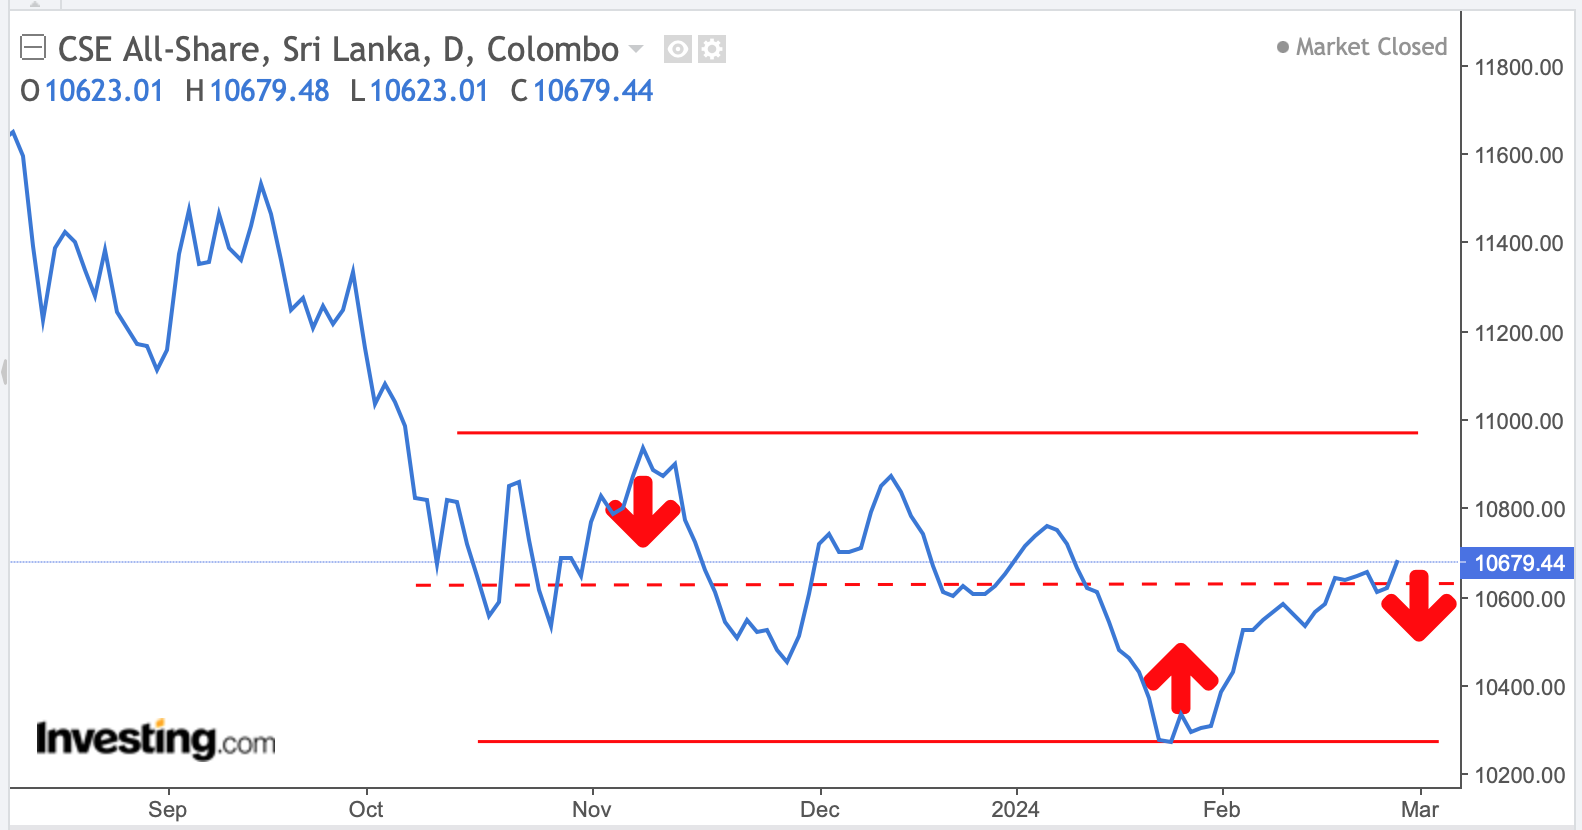 Colombo Stock Market ready for another Downtrend?